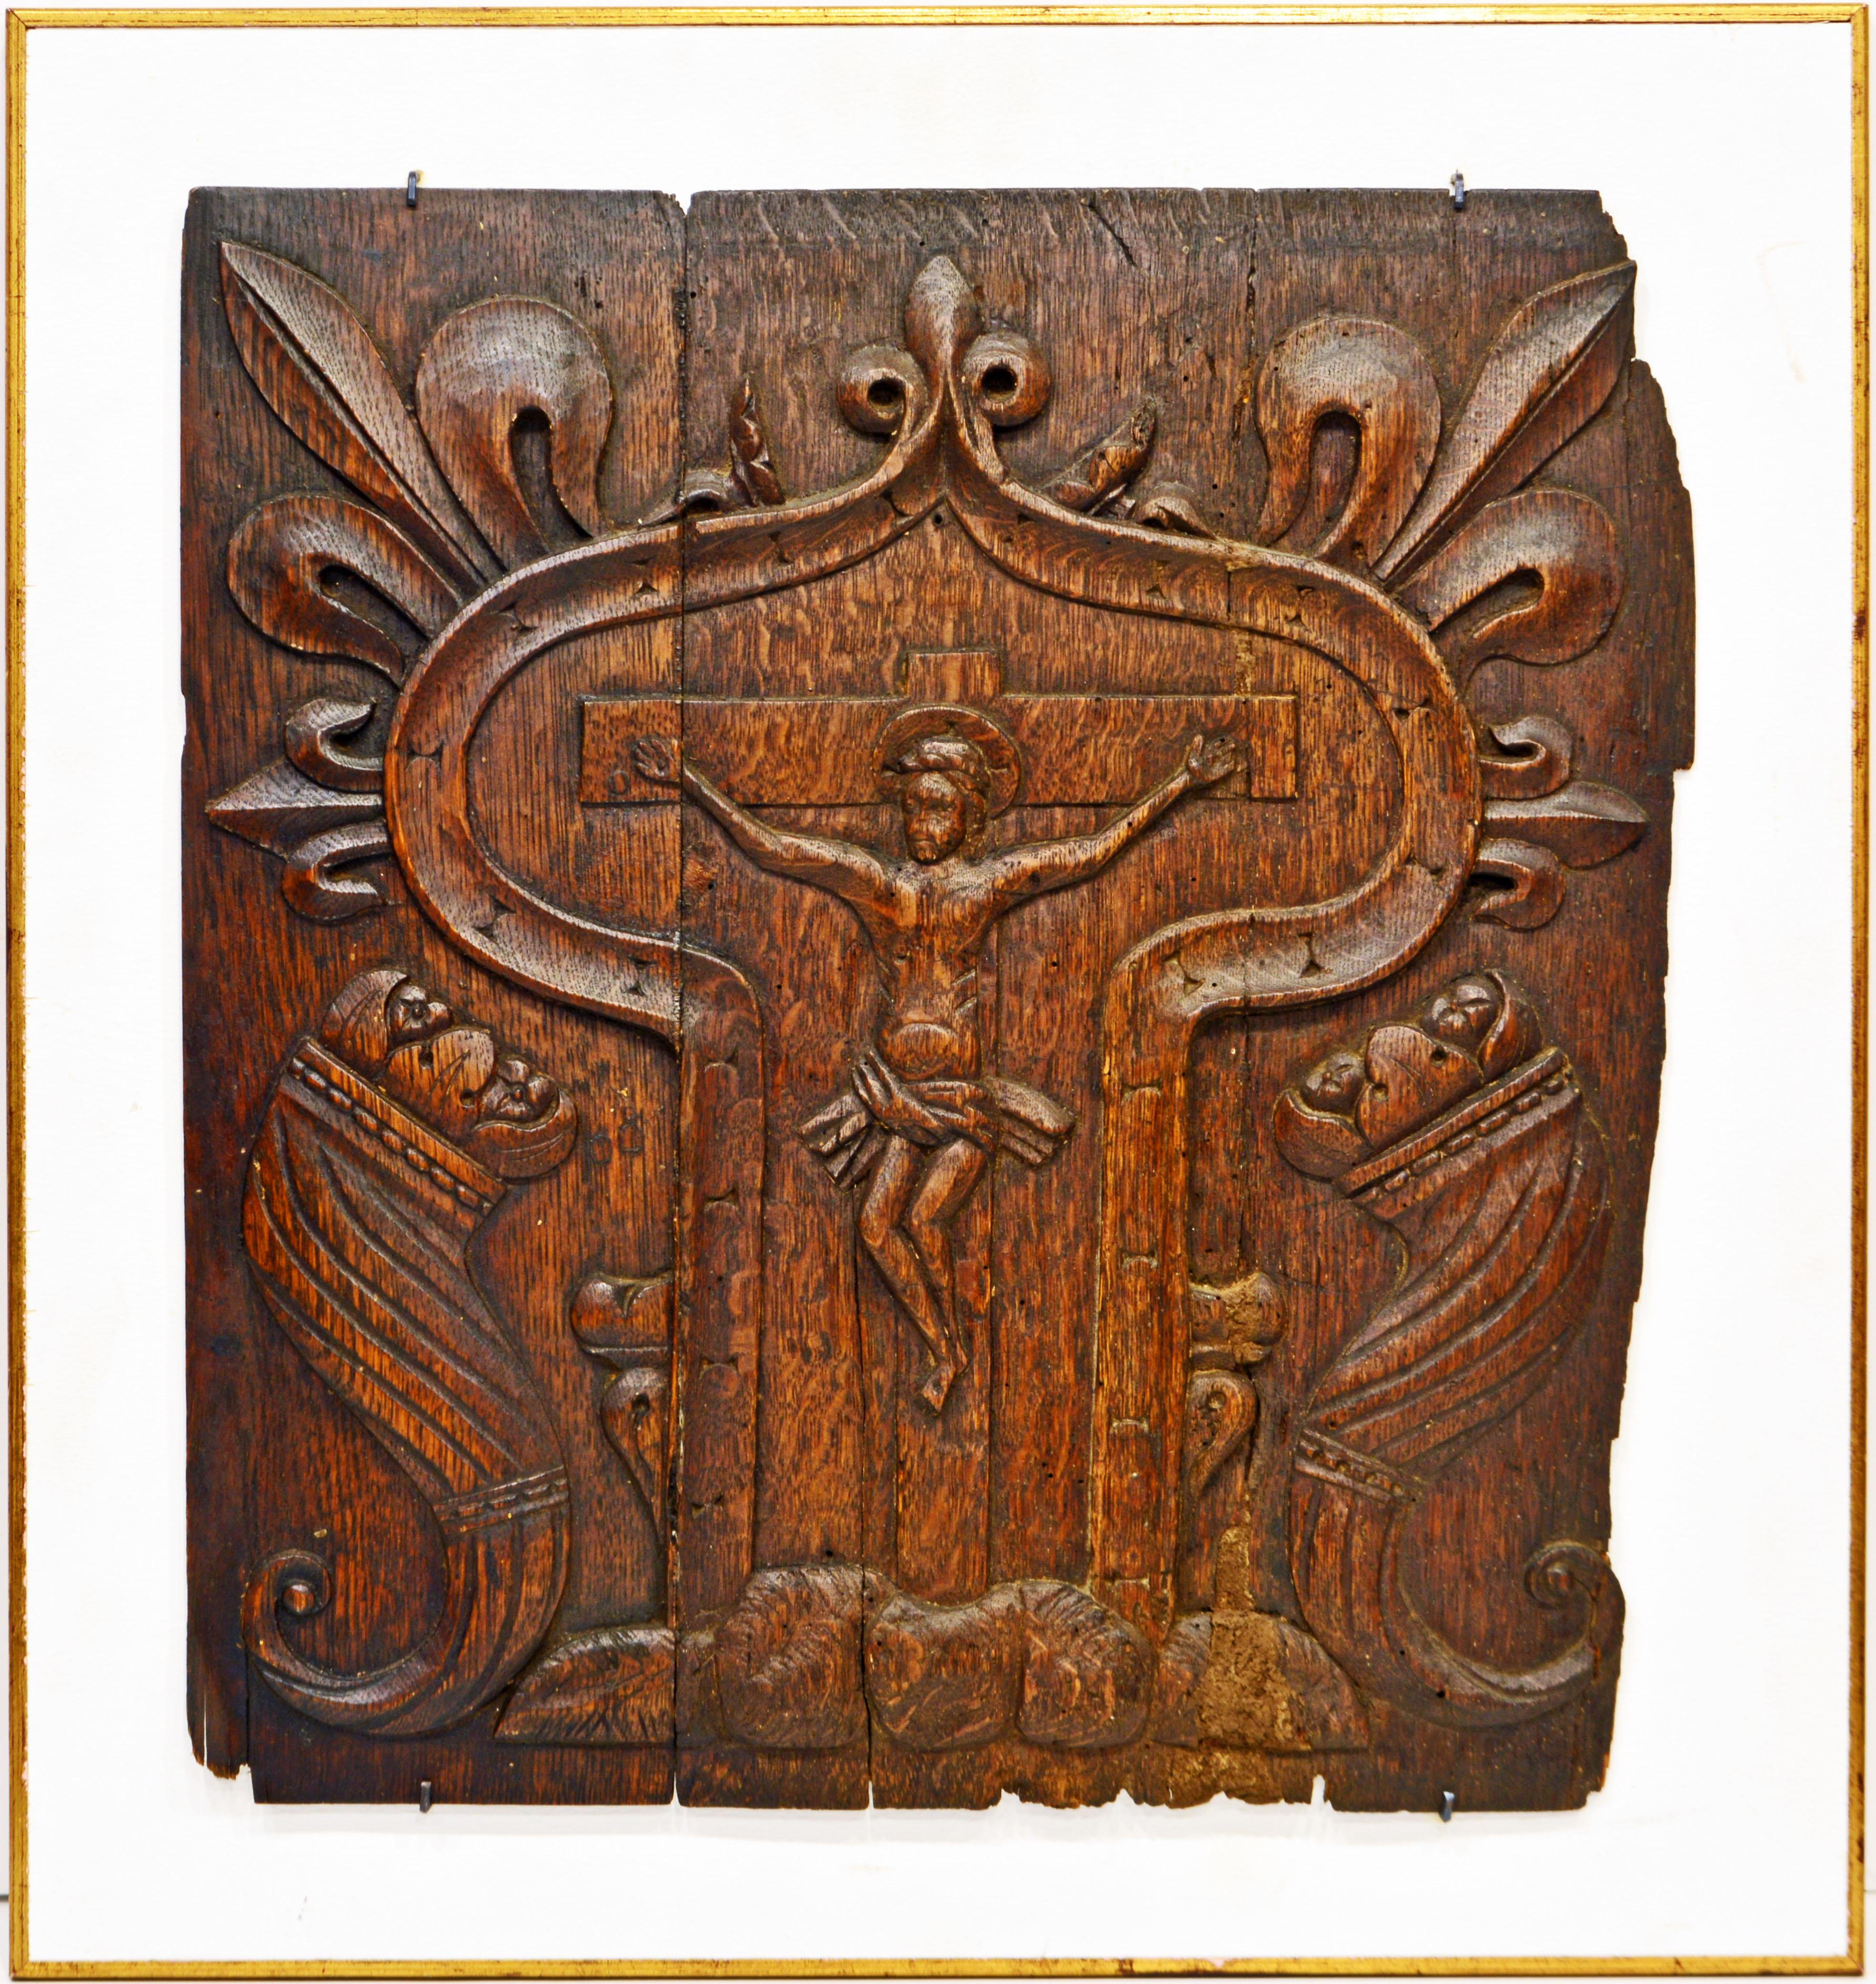 This medieval French relief carved oakwood panel depicts the crucified Christ flanked by two cornucopias and incorporated in a shaped border surmounted by the Fleur-de Lis symbol and radiating similar symbols. The carving is archaic in the